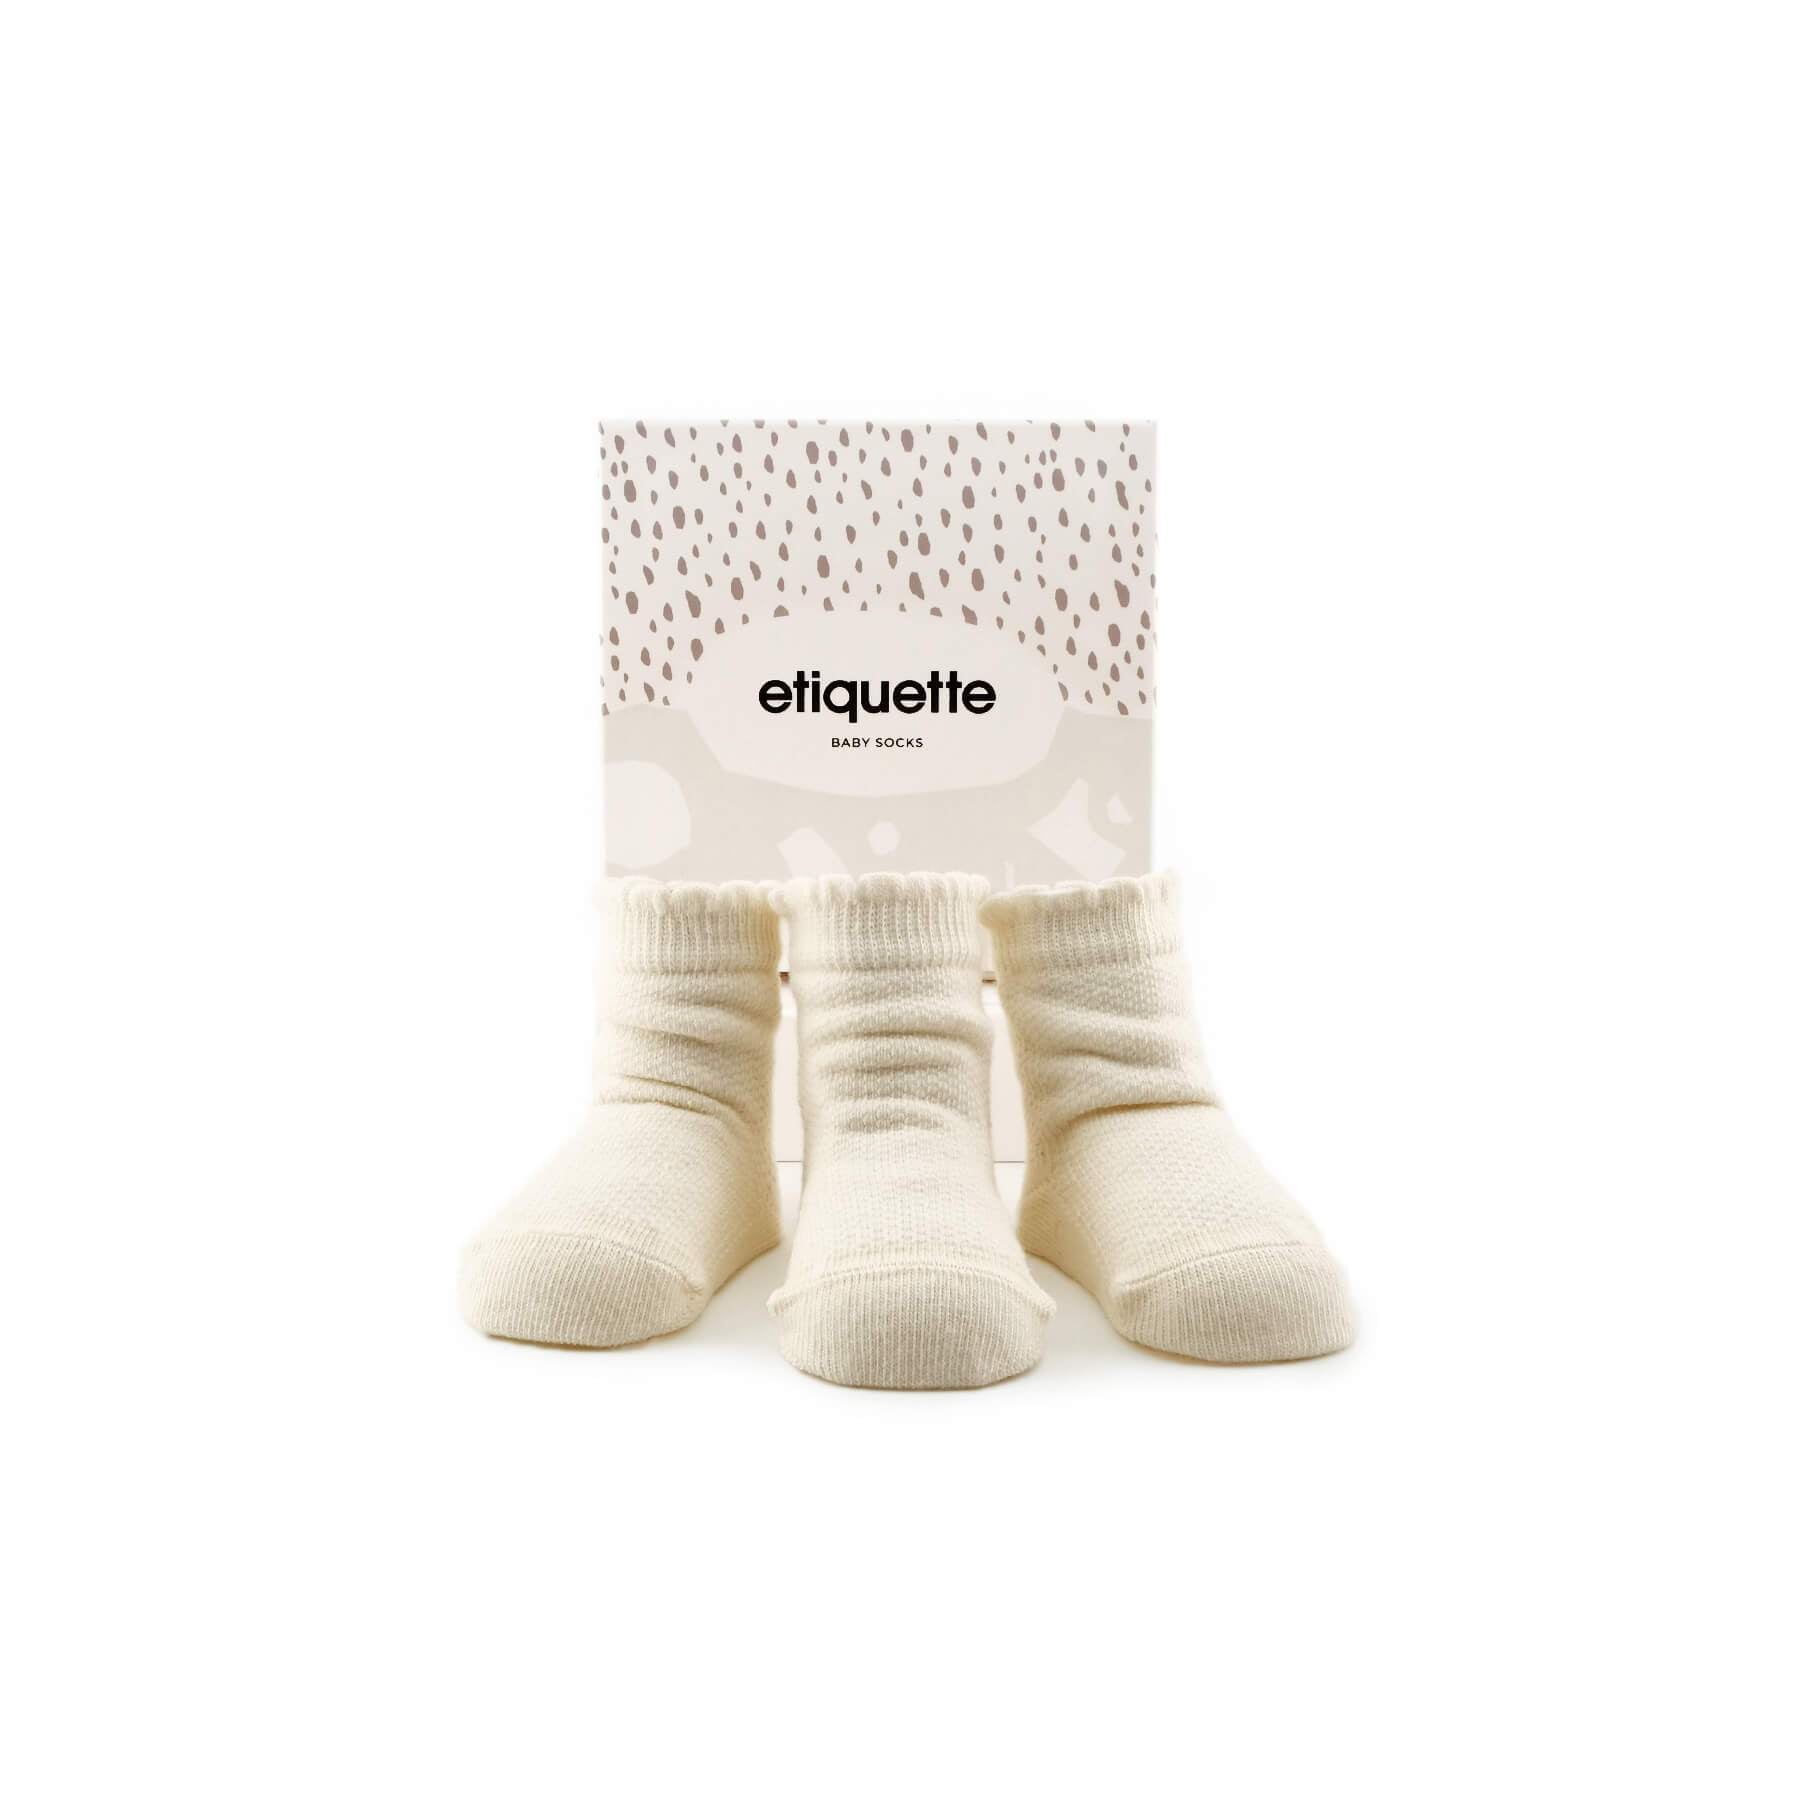 Baby Socks - Cashmere Pique Baby Socks Gift Box - Ecru - baby shower - main view⎪Lil'Etiquette Clothiers